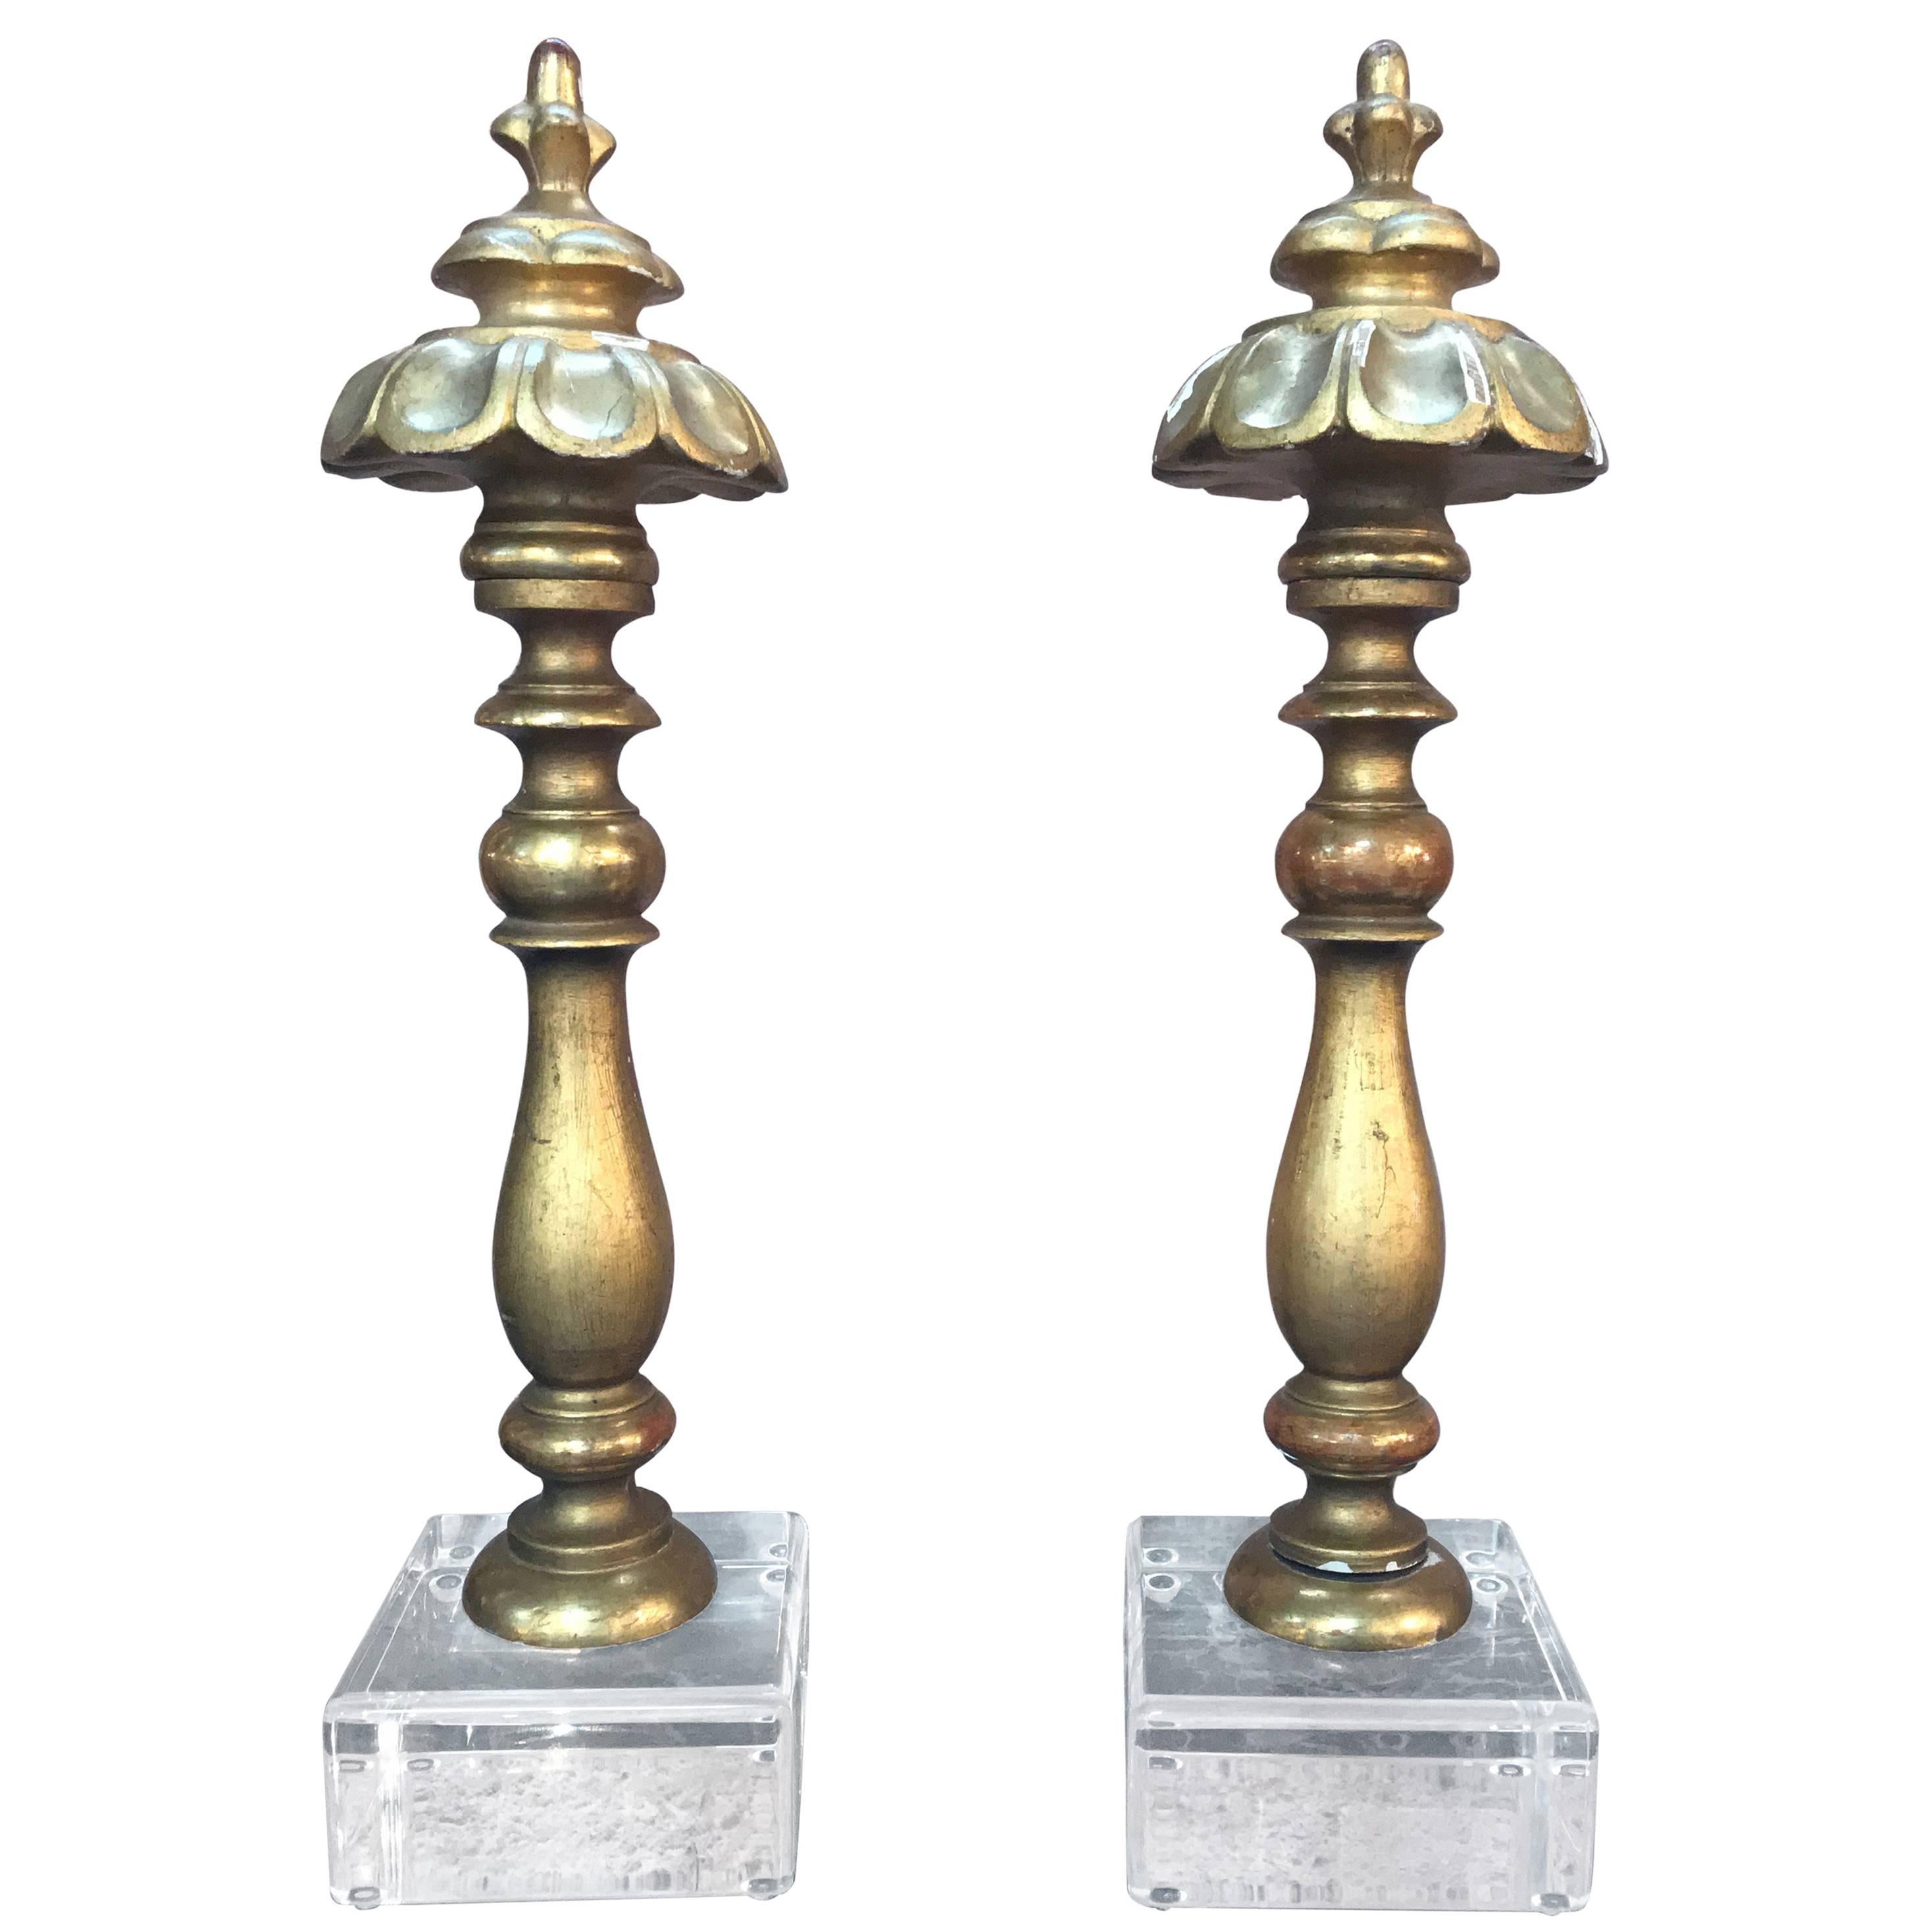 Pair of Italian Giltwood Finials on Lucite Bases